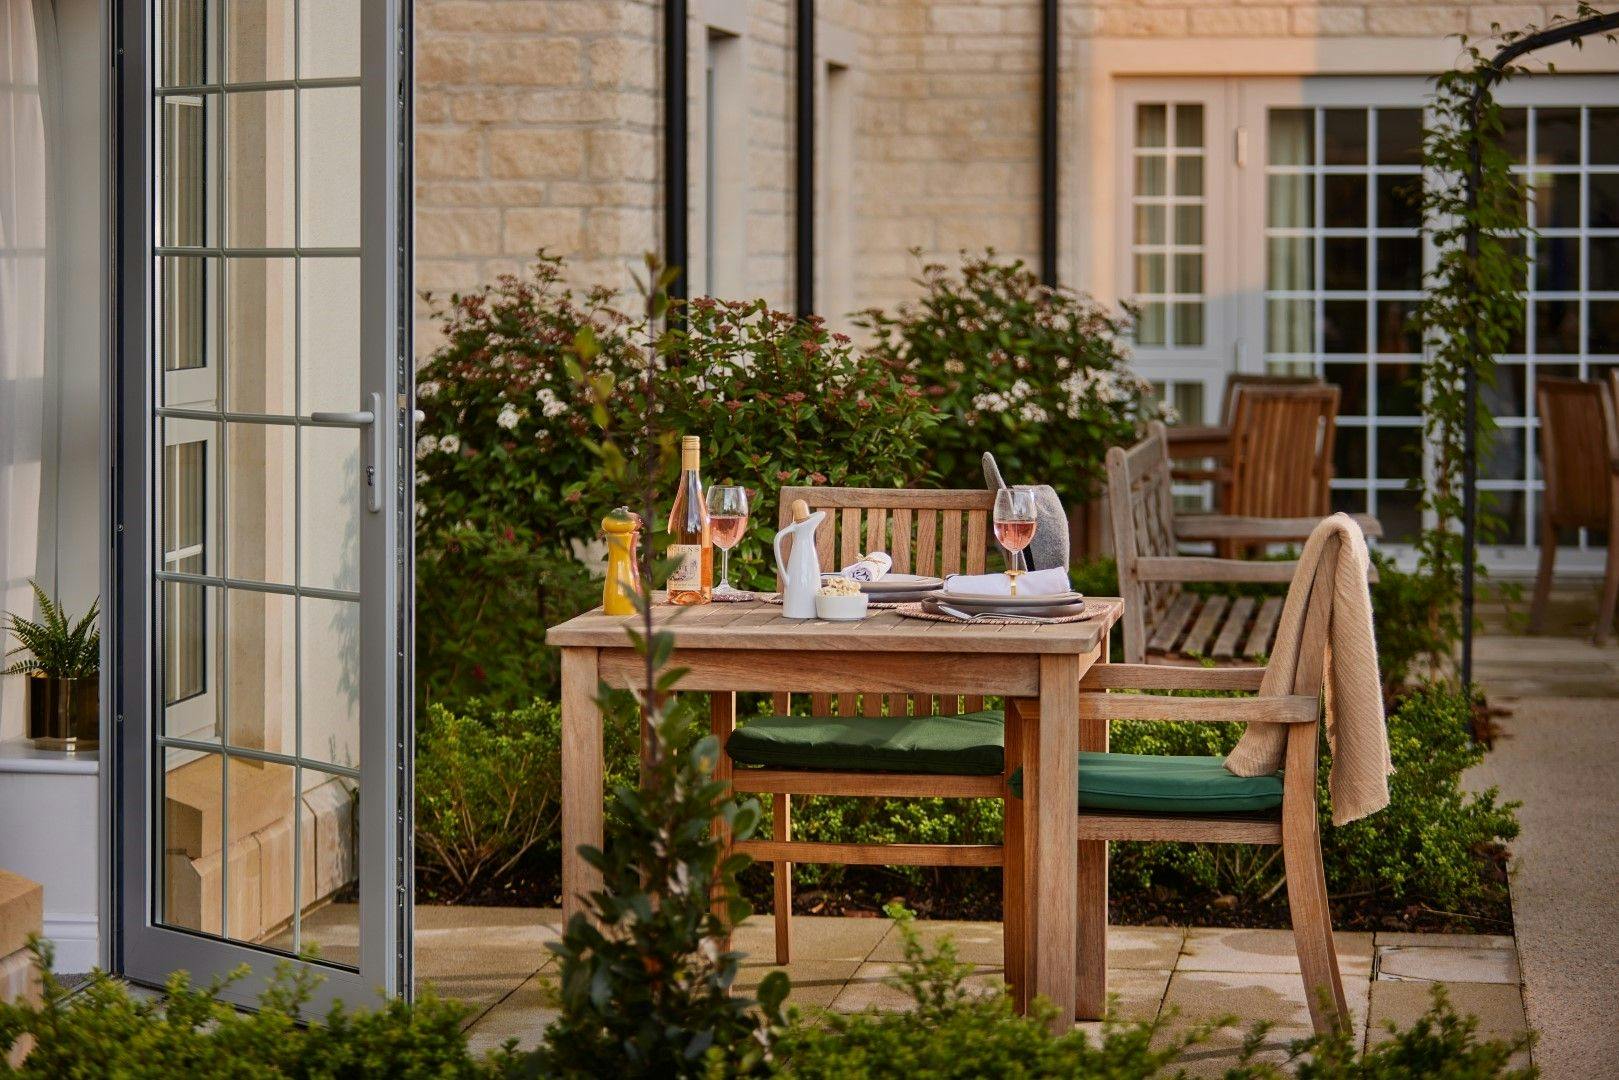 Garden at Midford Manor Care Home in Bath, Somerset